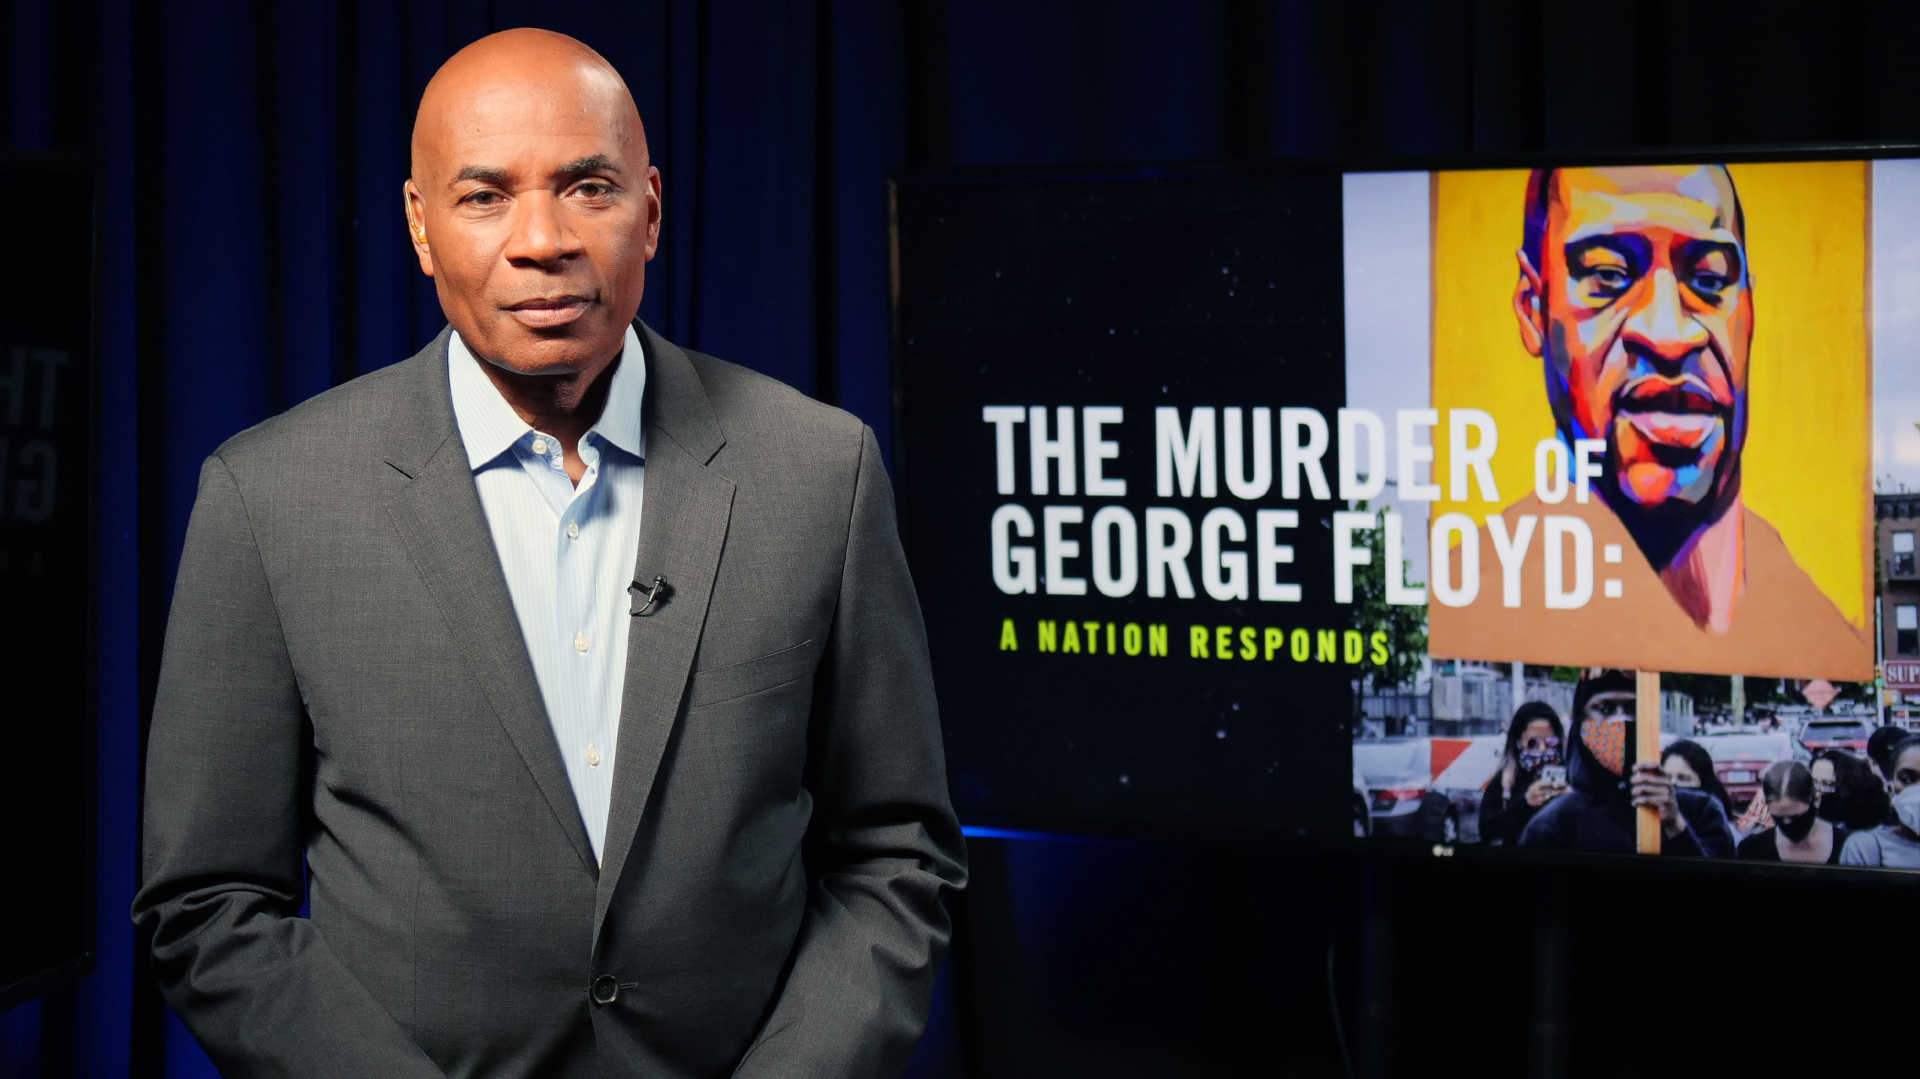 ID to air THE MURDER OF GEORGE FLOYD: A NATION RESPONDS